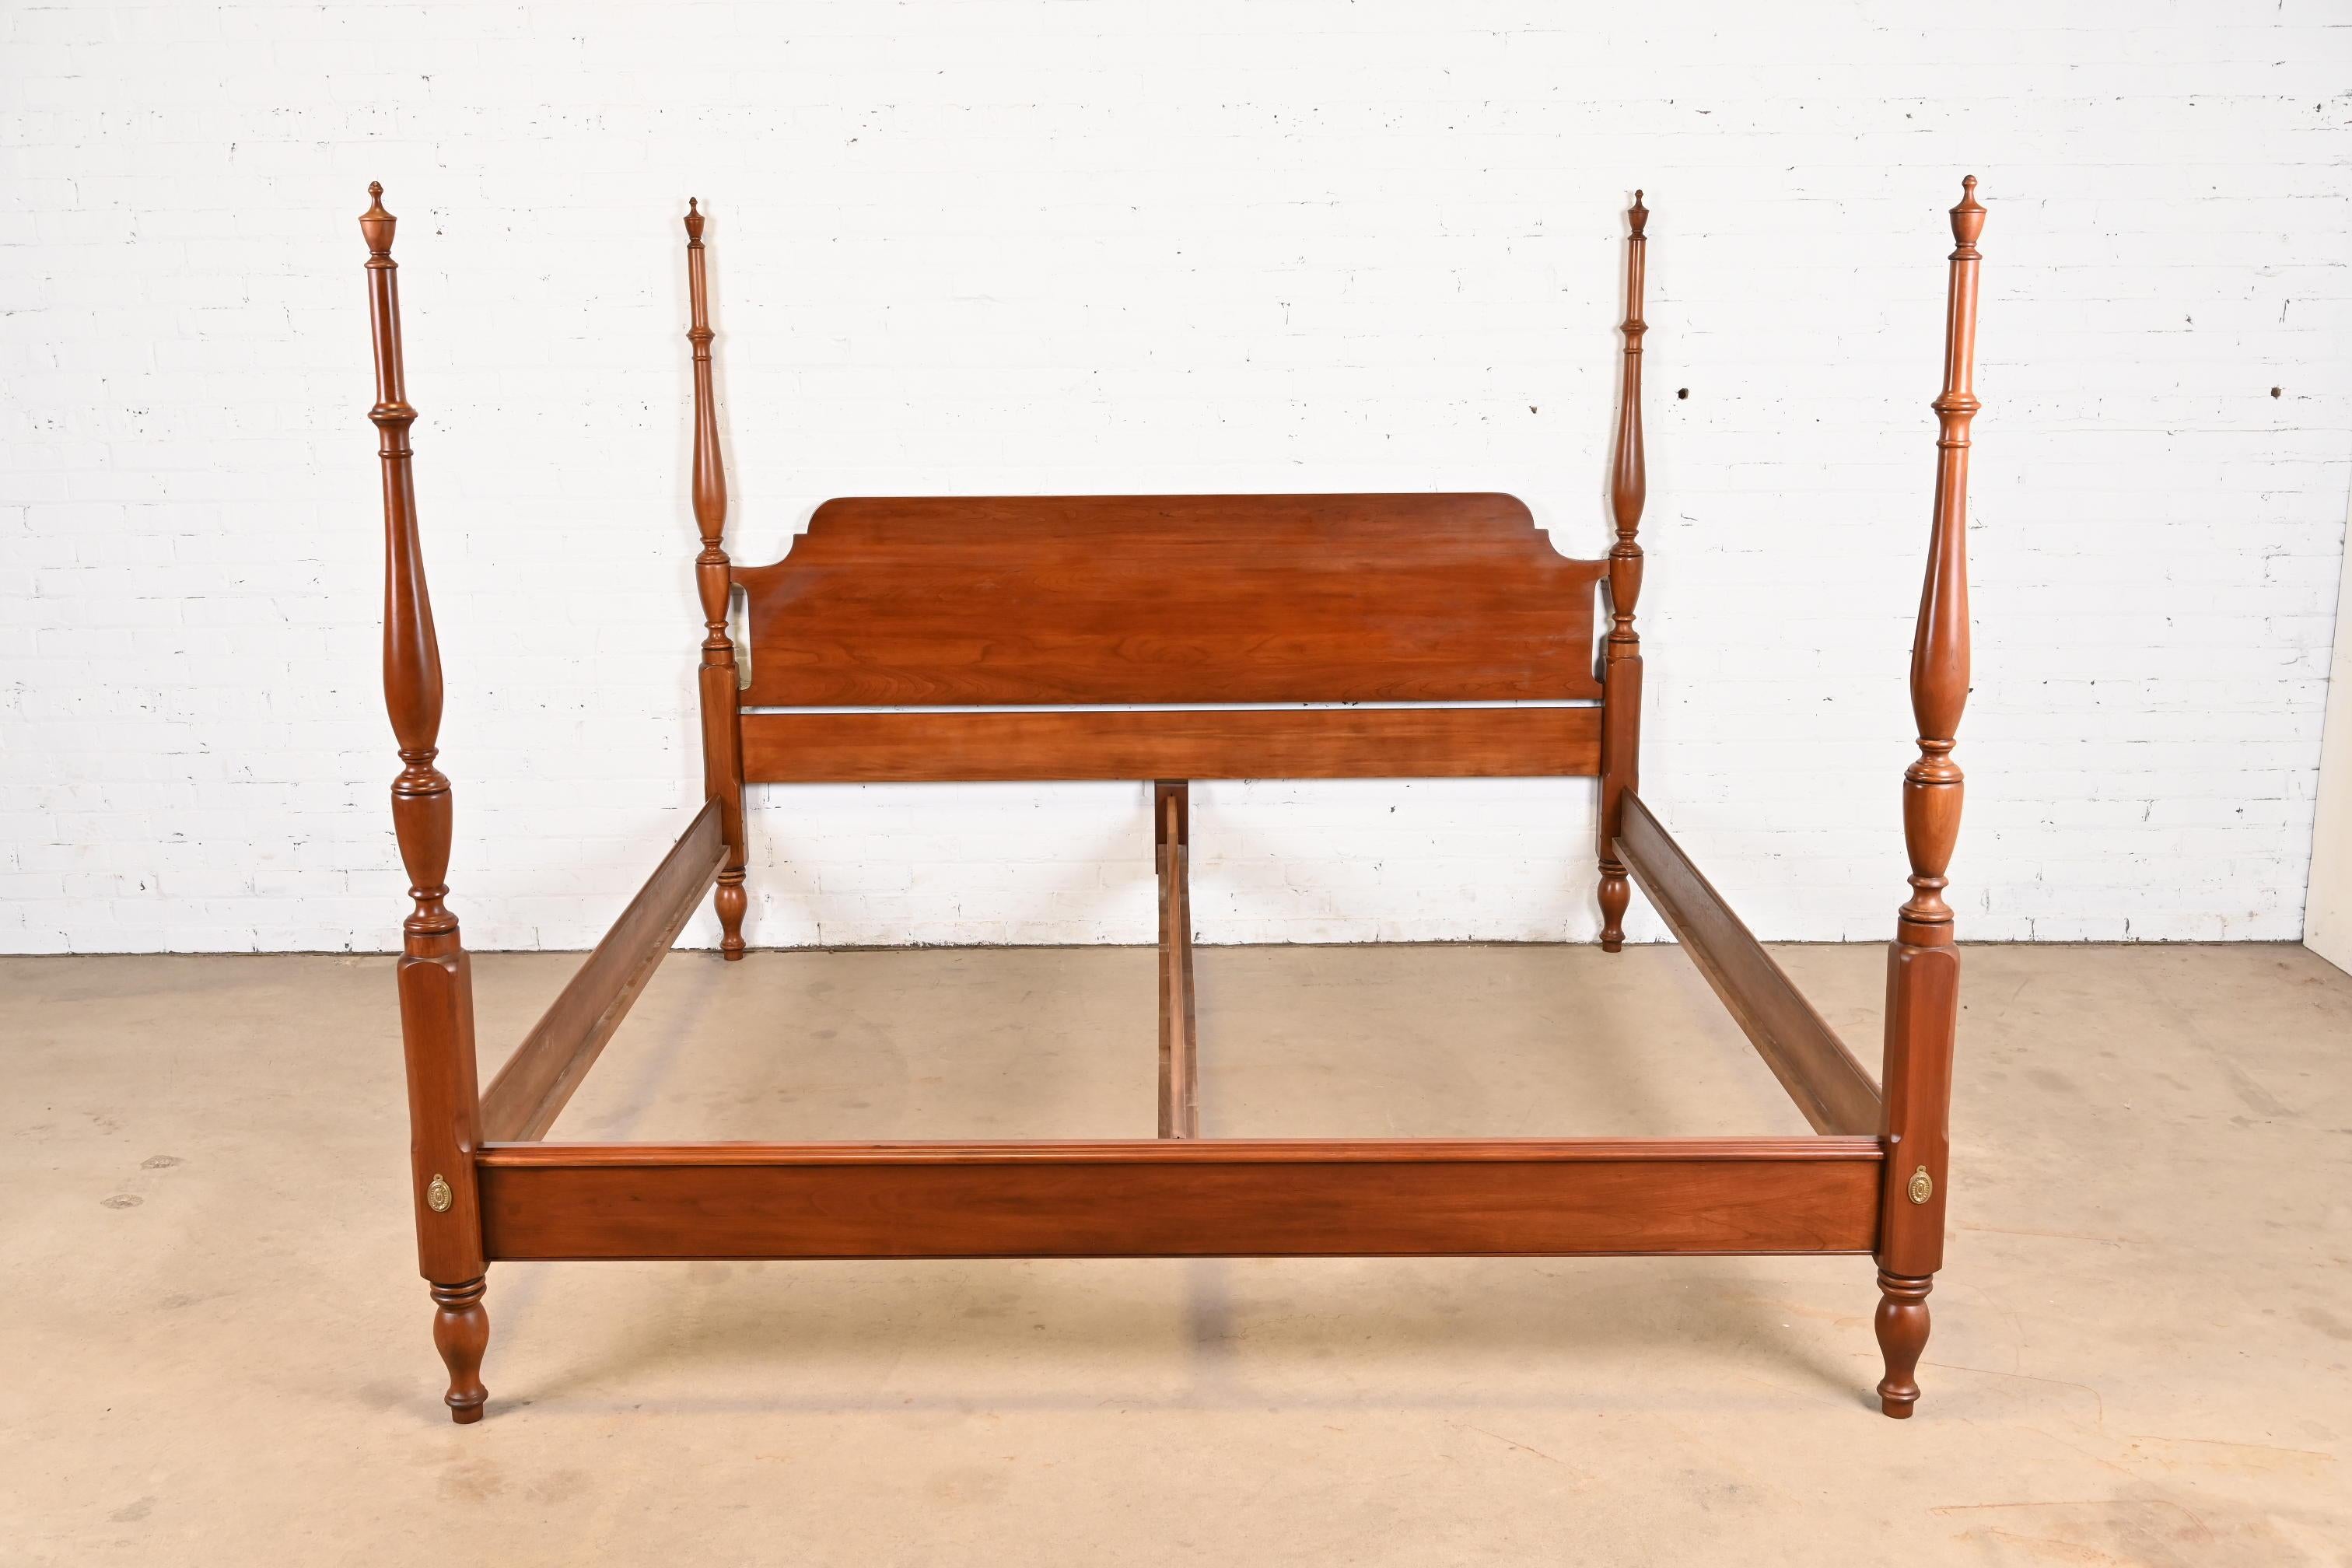 A gorgeous Georgian or Chippendale style four poster king size bed frame

By Henkel Harris

USA, 1975

Carved solid cherry wood, with brass accents.

Measures: 81.5